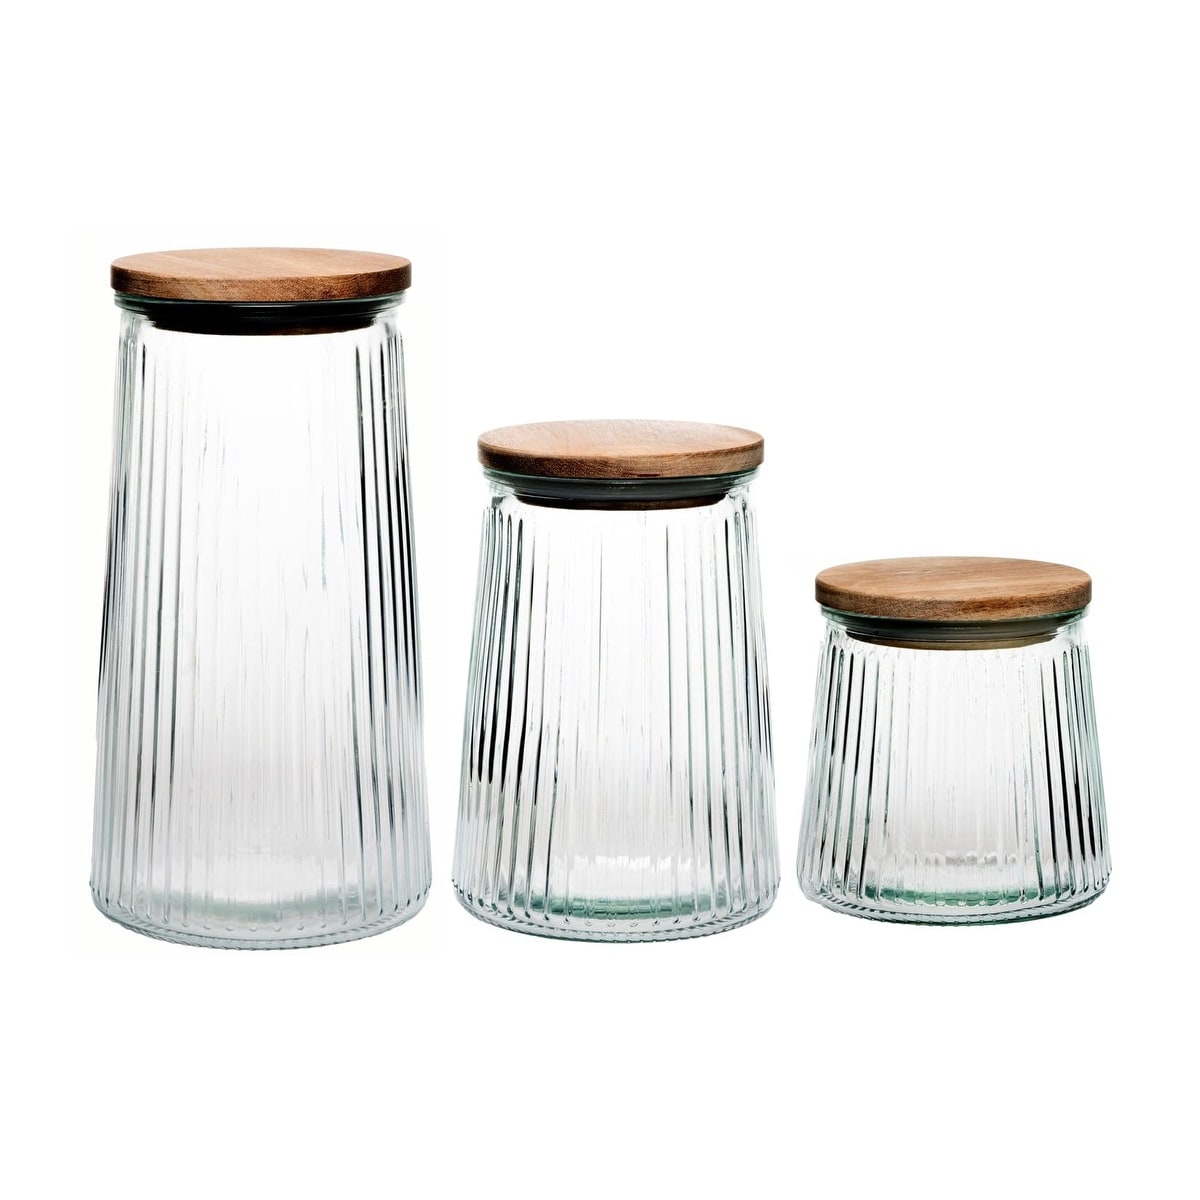 https://ak1.ostkcdn.com/images/products/is/images/direct/e4ea051a9a07ad4c91c1ade792798d4240d59c84/Amici-Home-Hawthorn-Glass-Canister-Storage-Jar.jpg